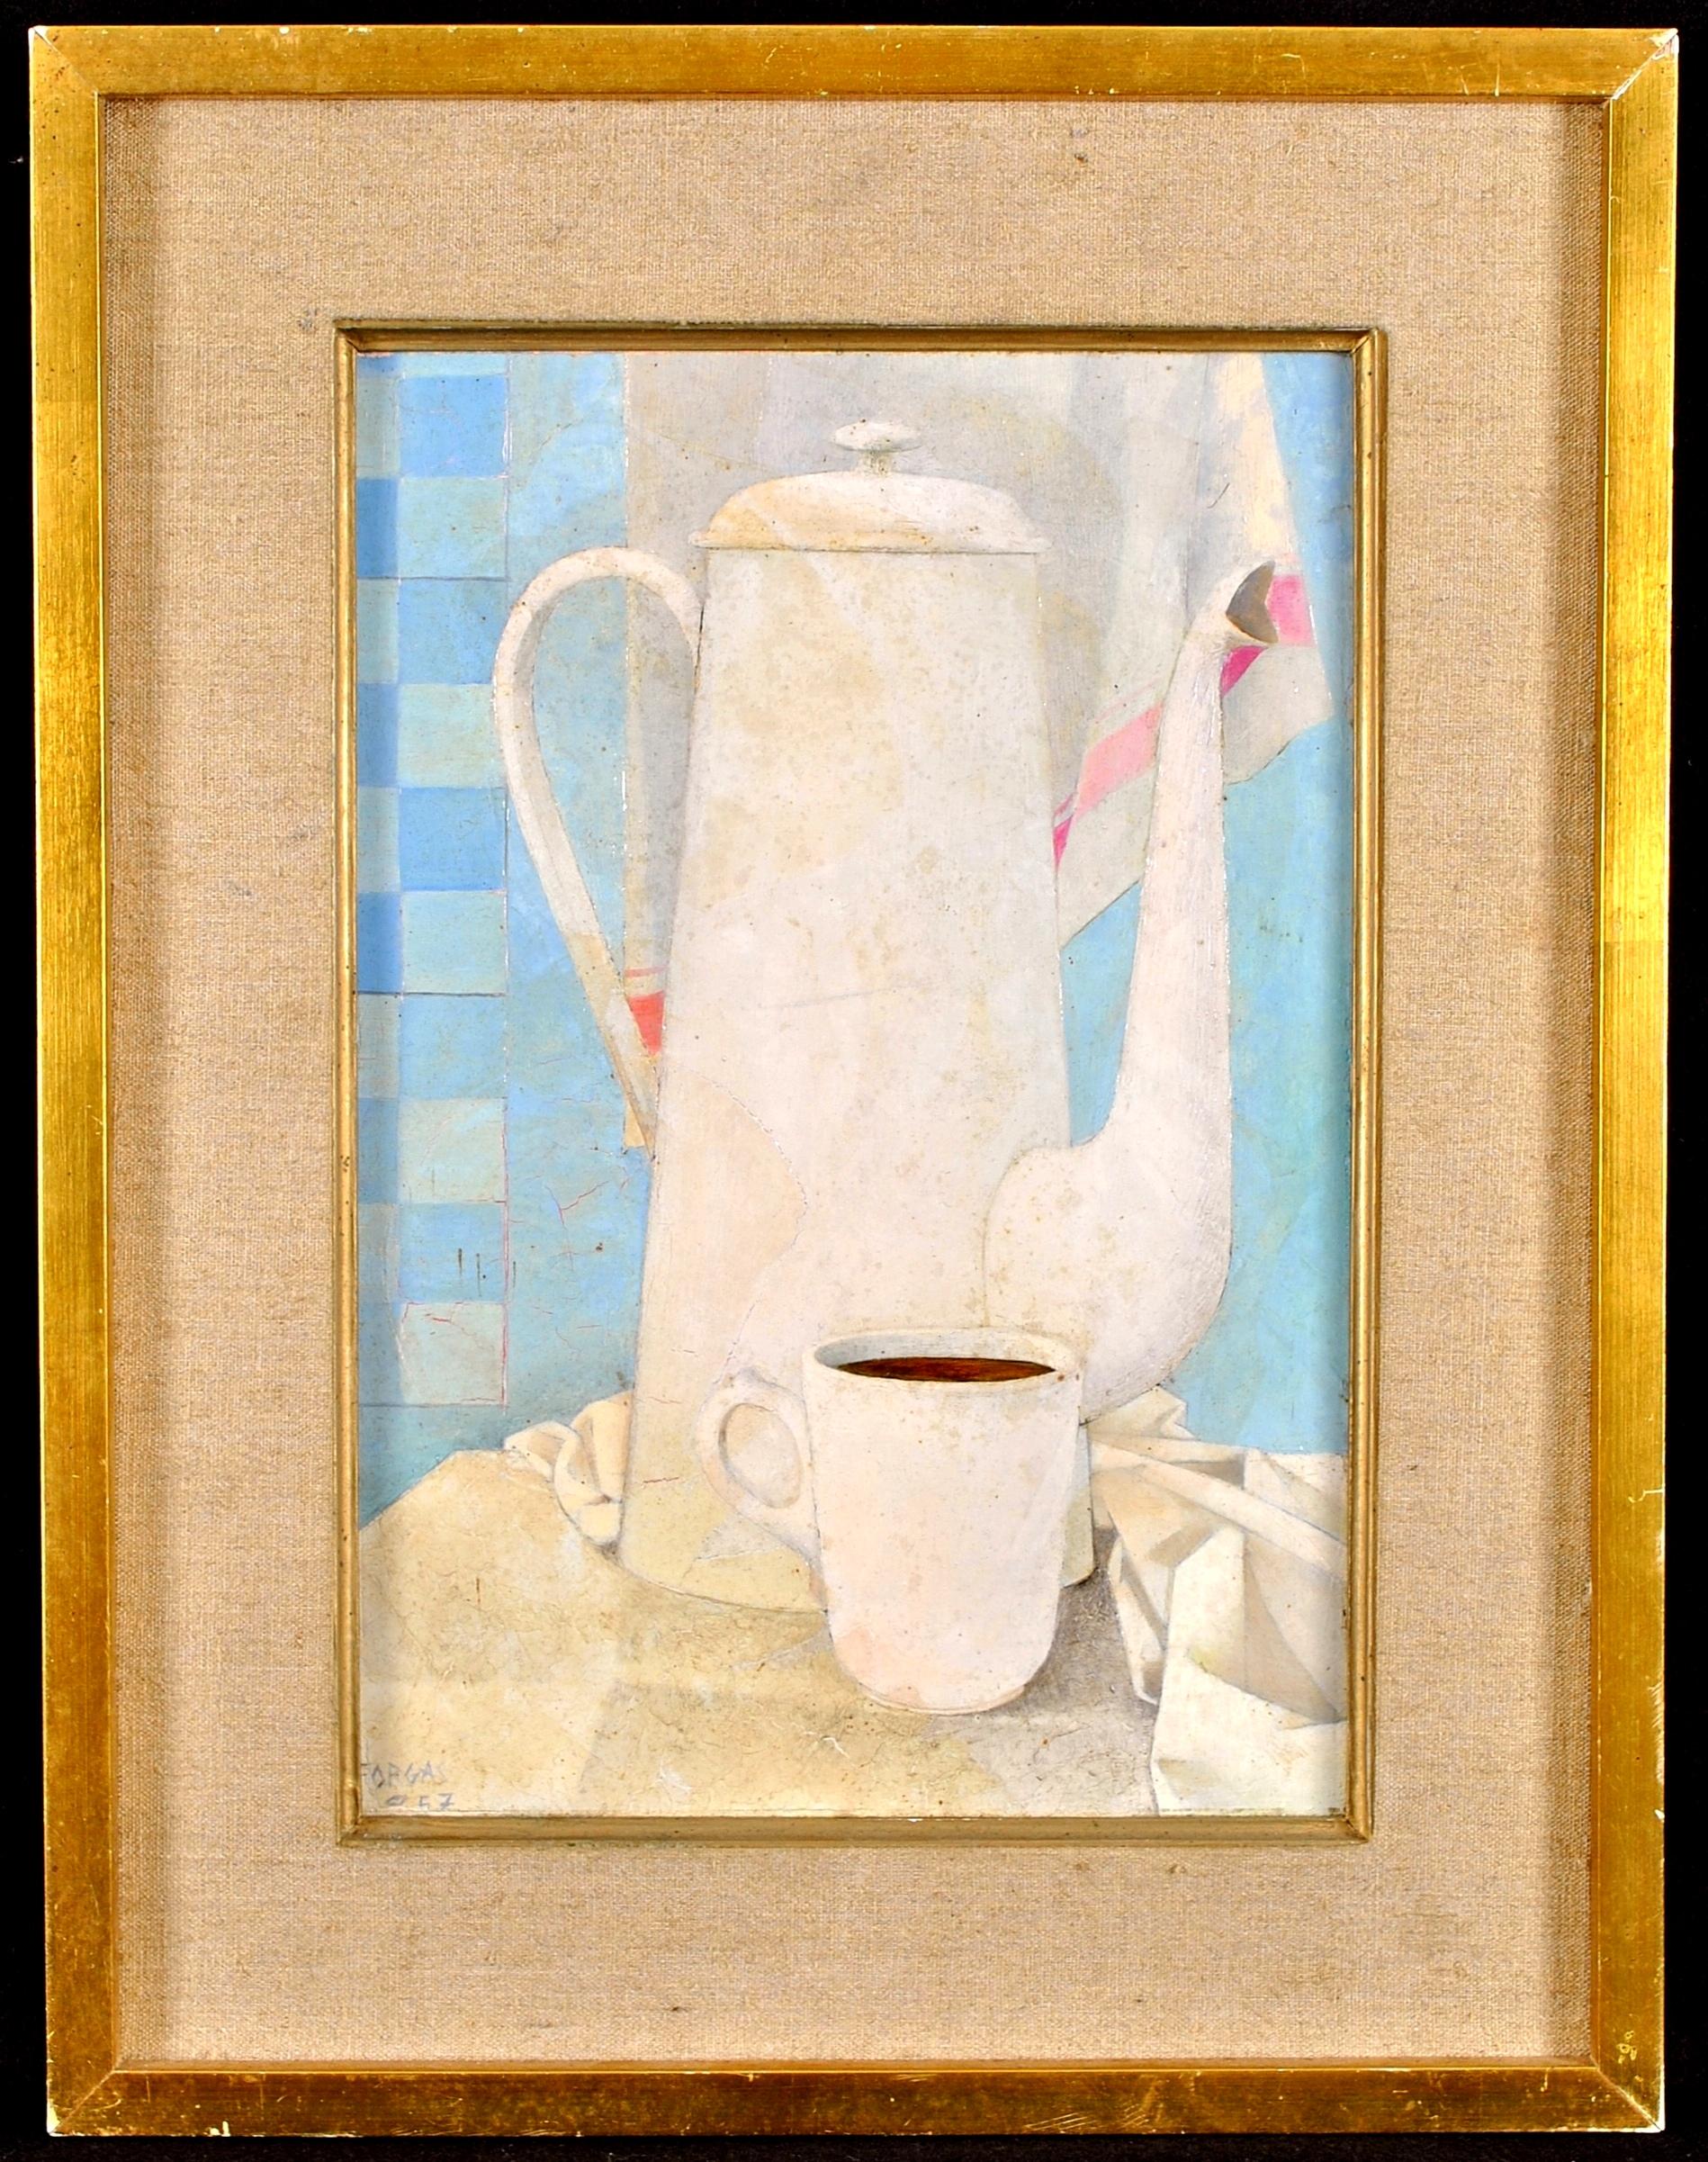 Mid 20th Century French School Still-Life Painting - Cafetiere Blanche - Mid 20th Century Cubist Modernist Oil on Board Painting